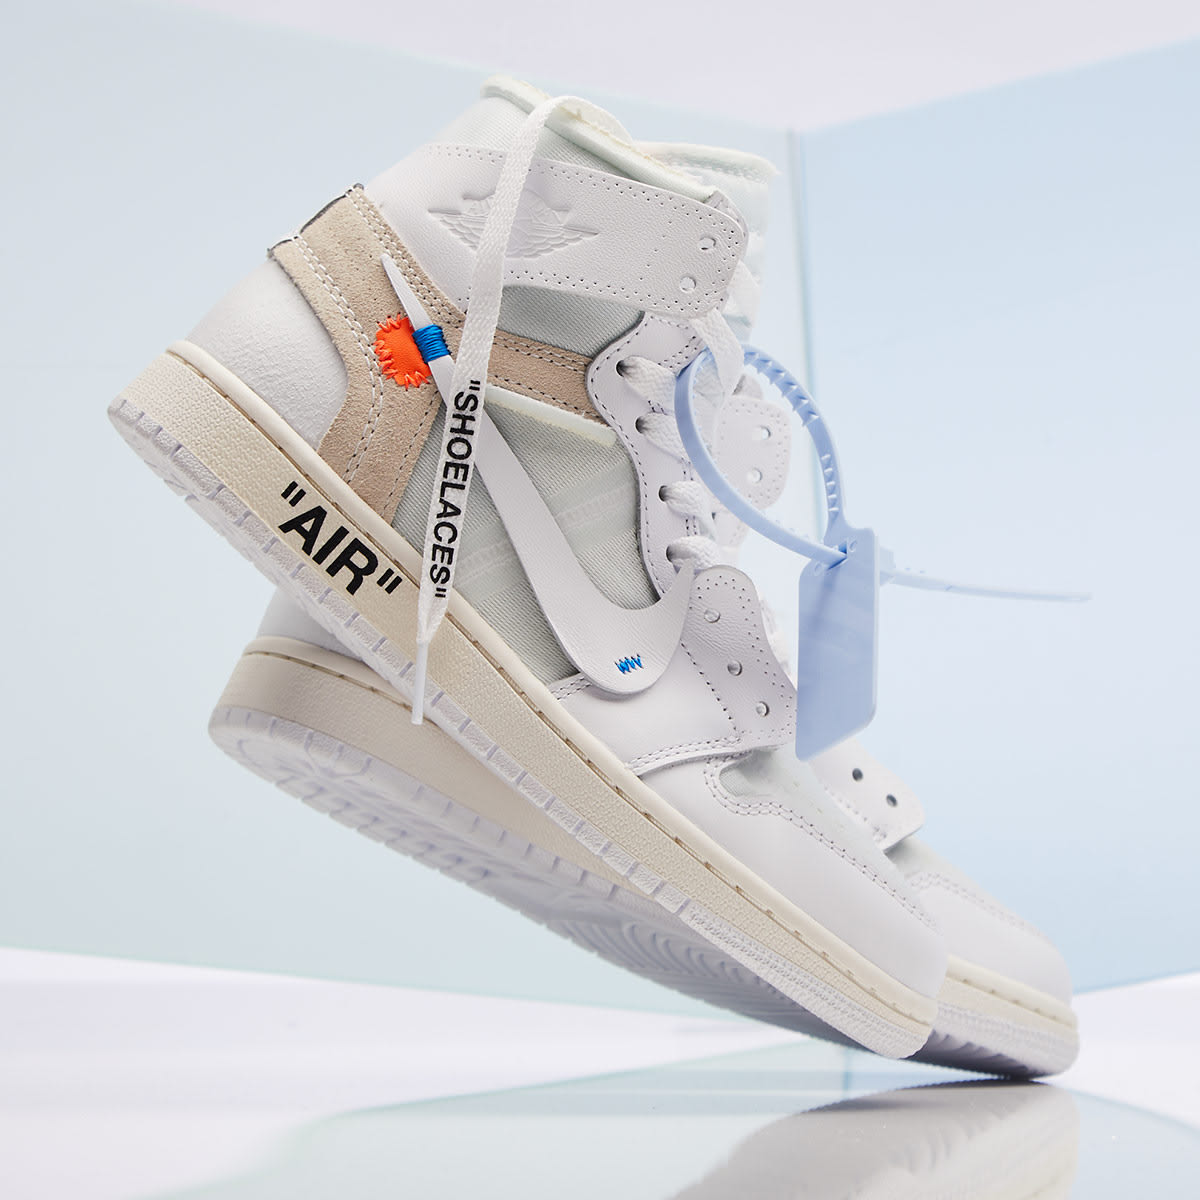 Official Images Of The OFF-WHITE x Air Jordan 1 •